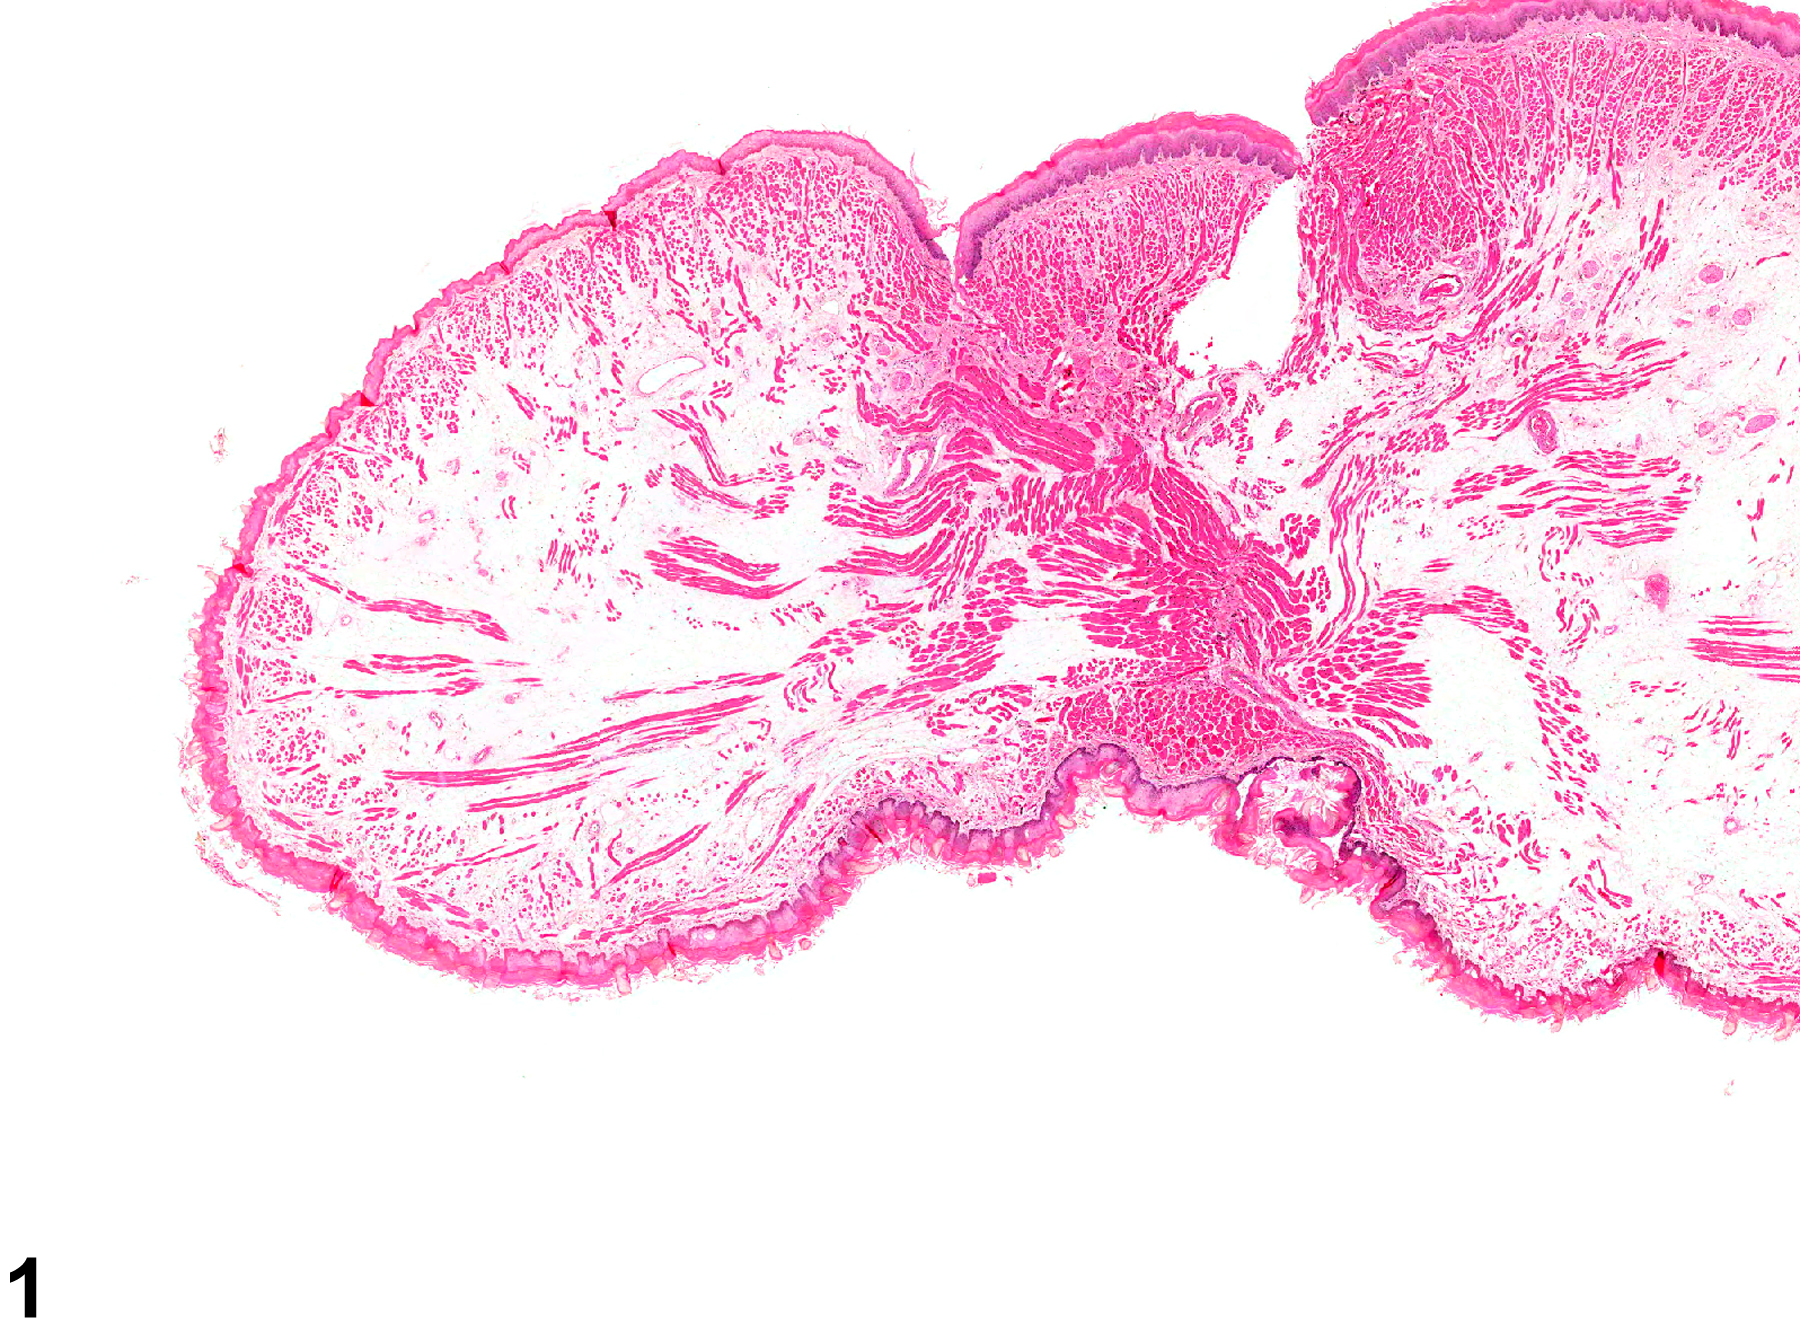 Image of edema in the tongue from a male F344/N rat in a chronic study